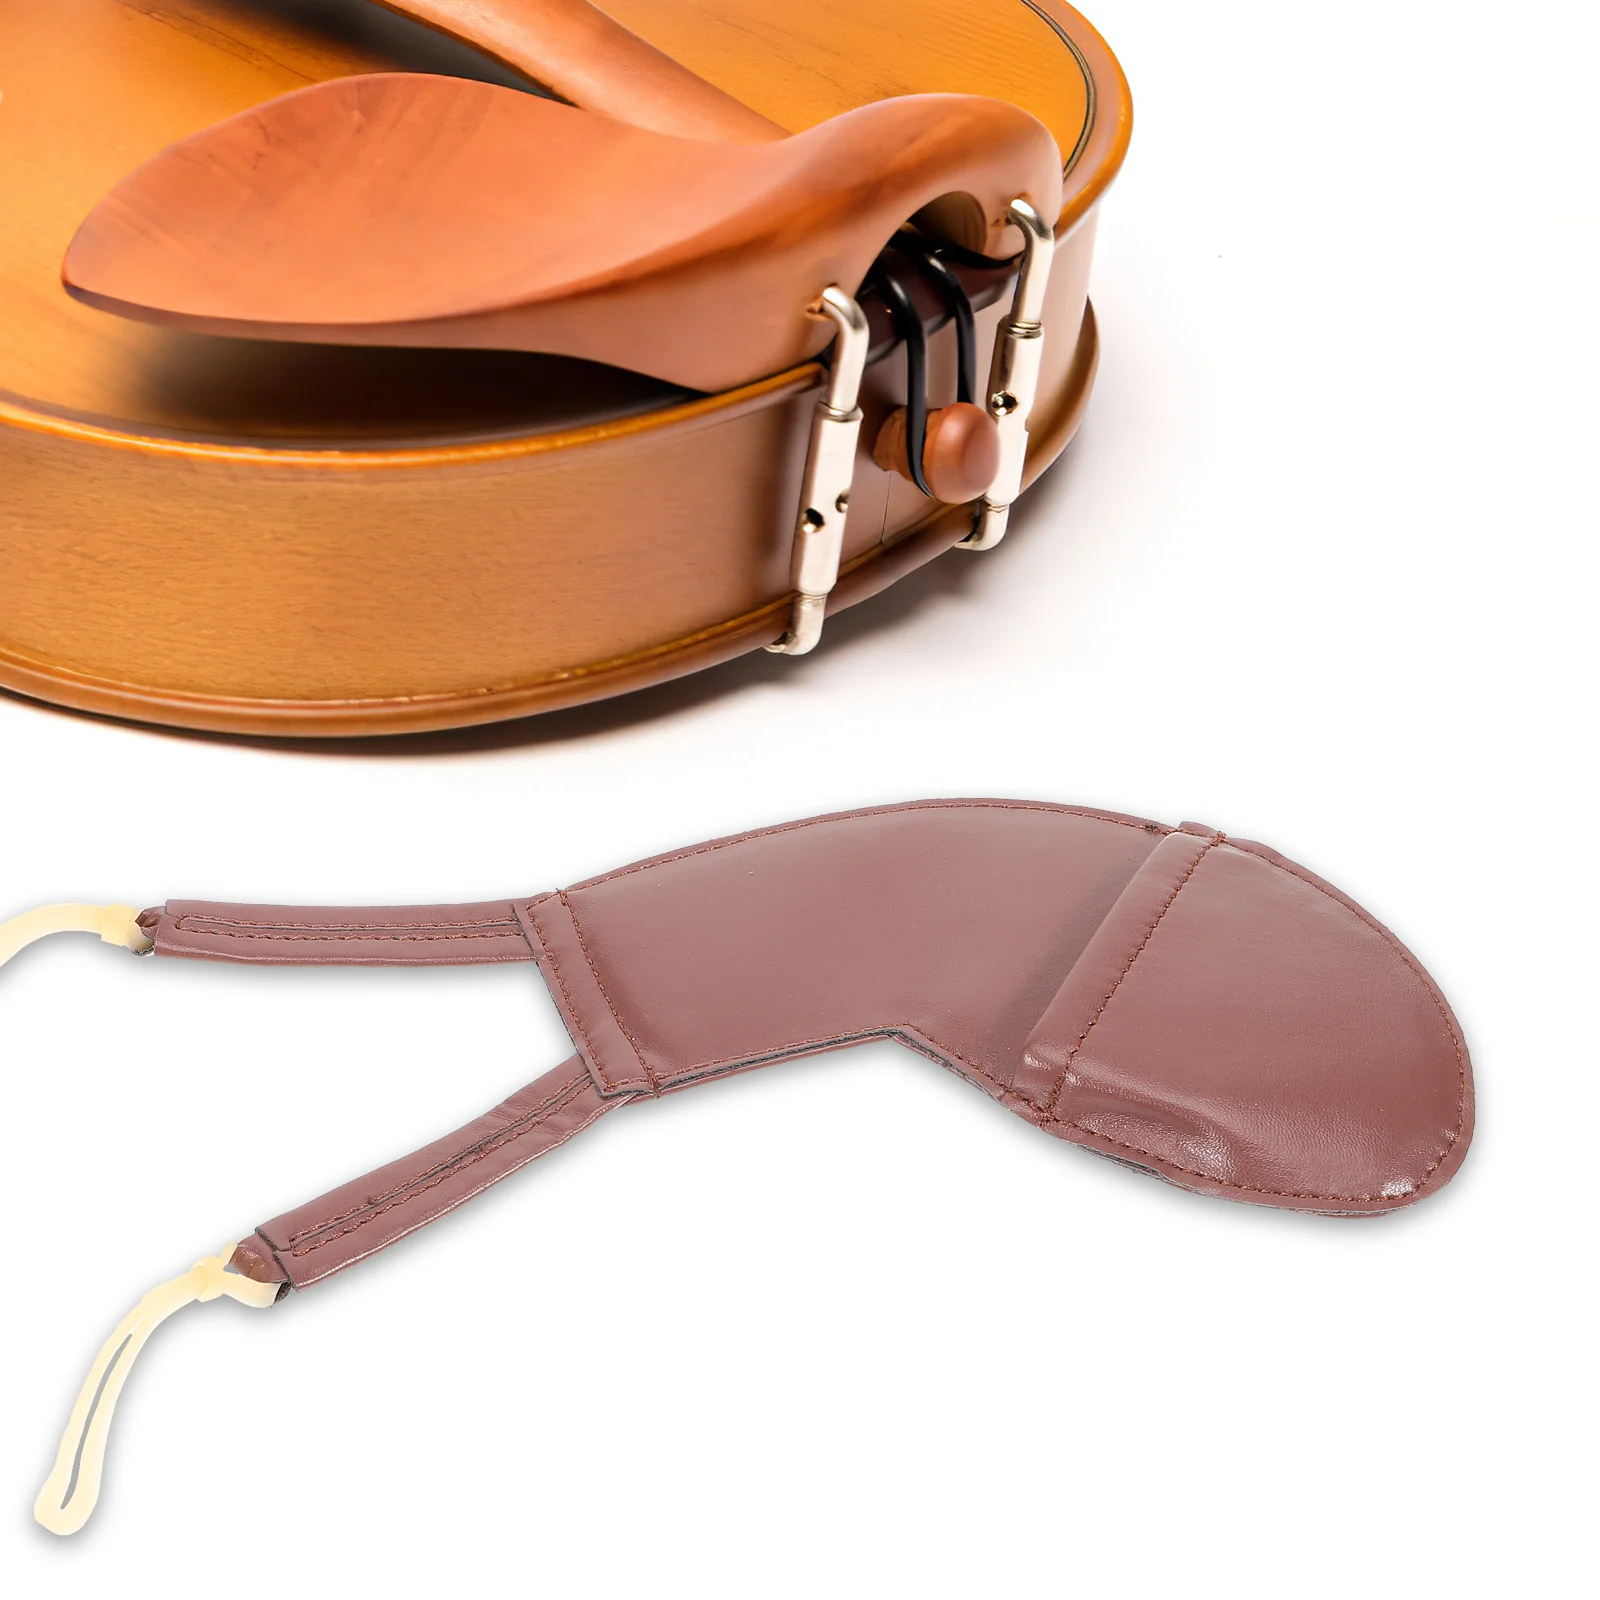 Comfortable Practical Violin Accessories for Concert enlarge